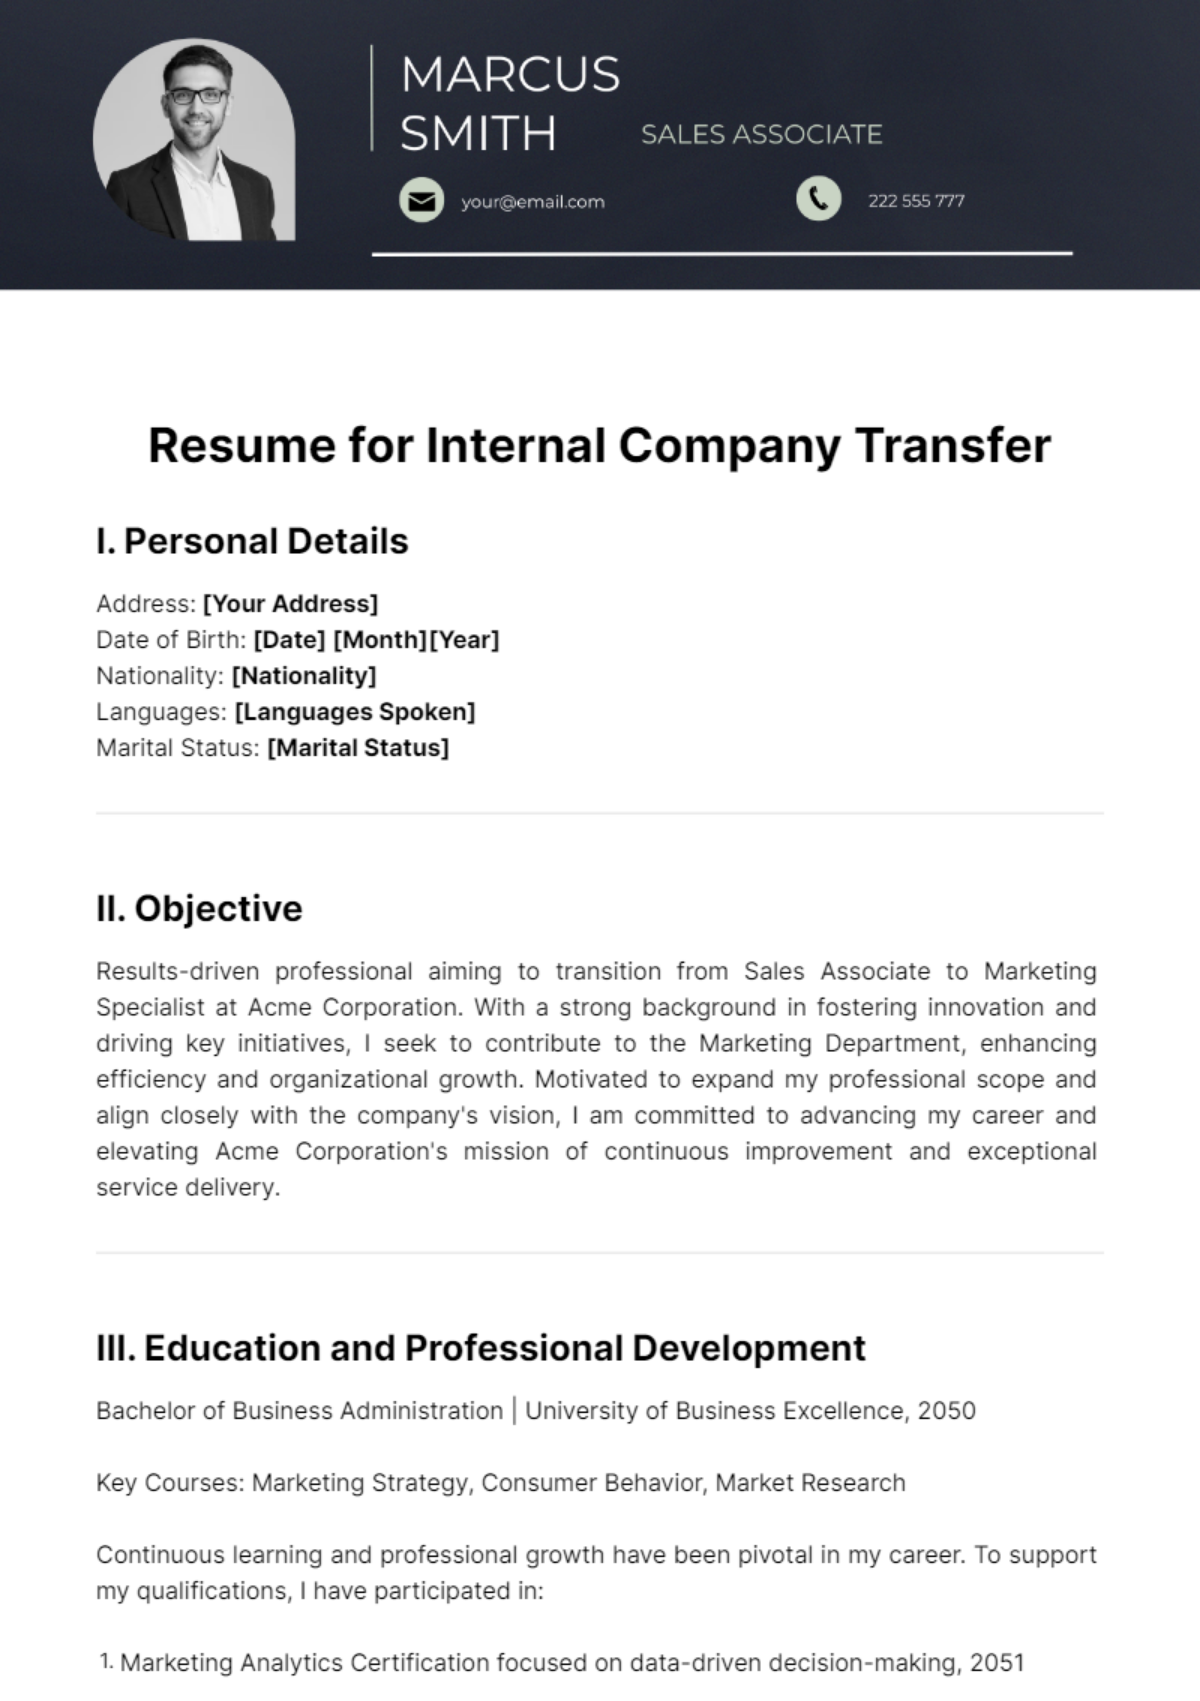 Resume for Internal Company Transfer Template